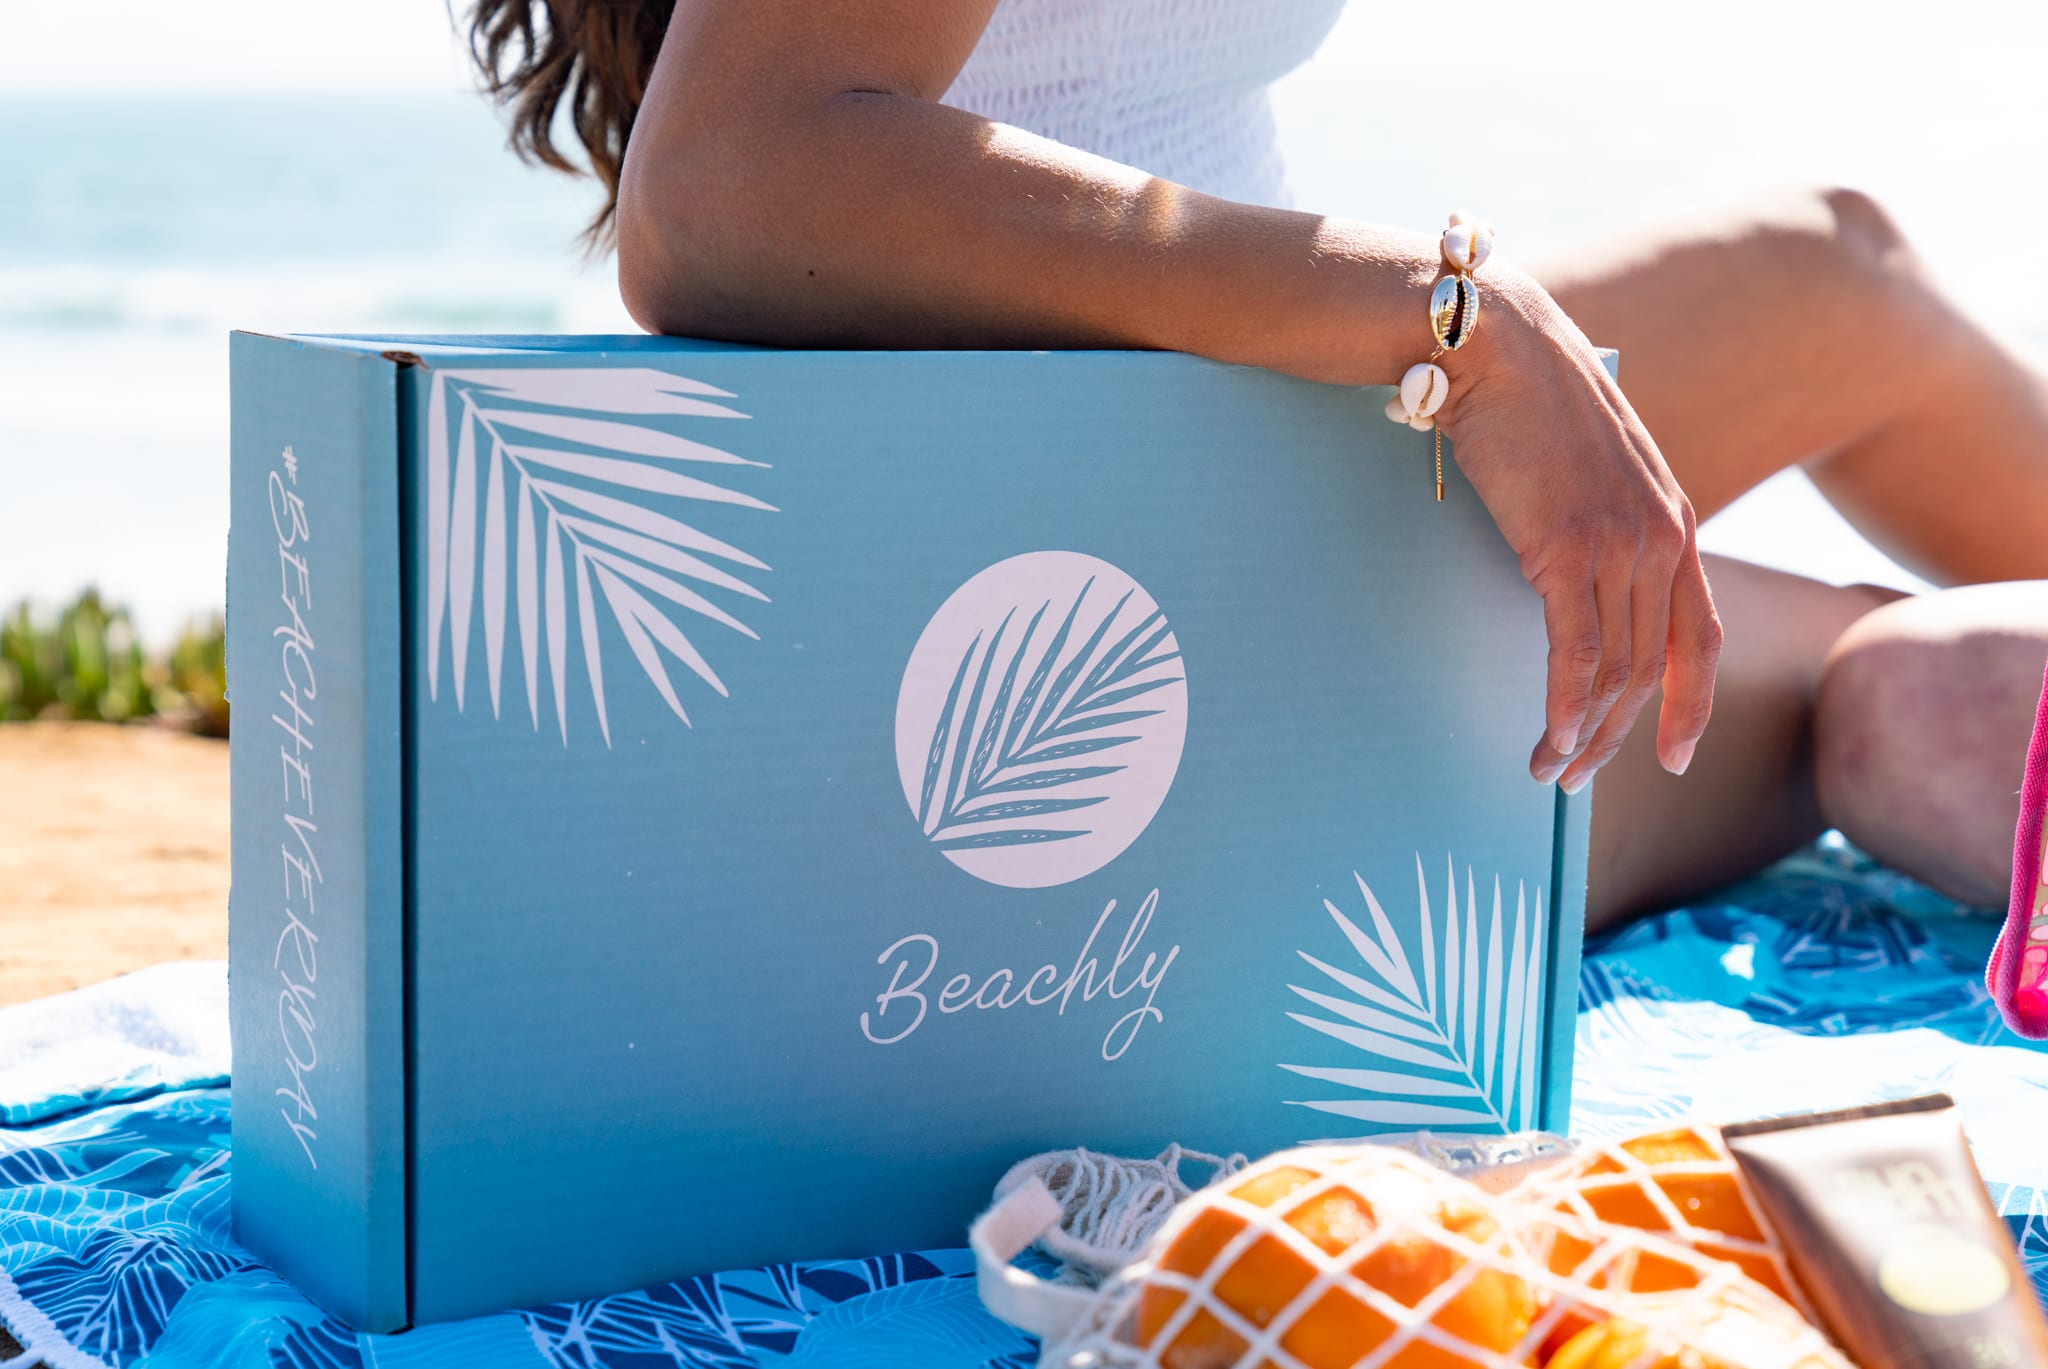 Beachly Coupons: $40 OFF